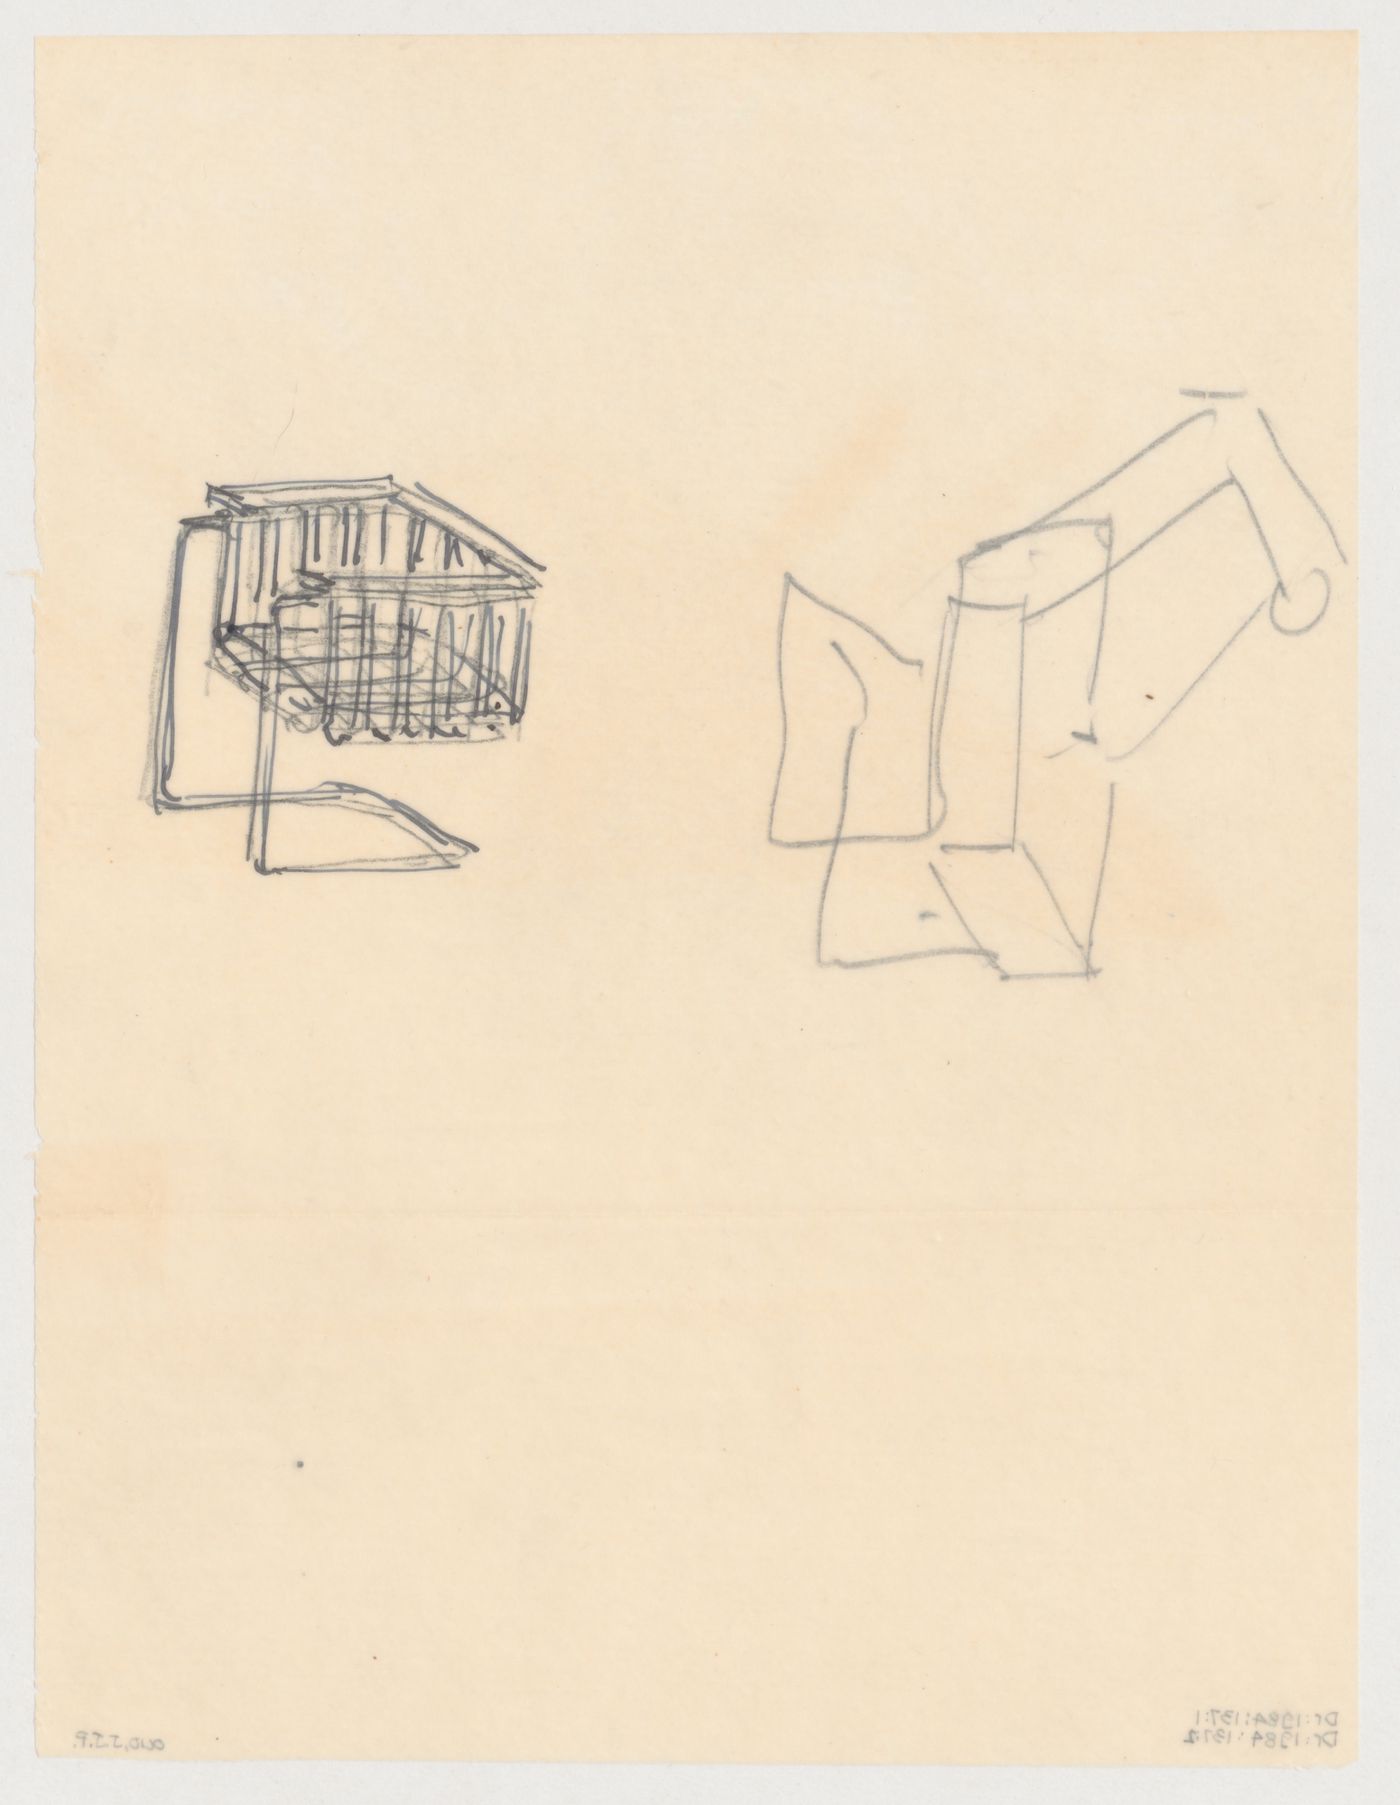 Sketch perspectives for a chair, possibly for Metz & Co., Amsterdam, Netherlands; verso: Sketch perspective for a chair, possibly for Metz & Co., Amsterdam, Netherlands